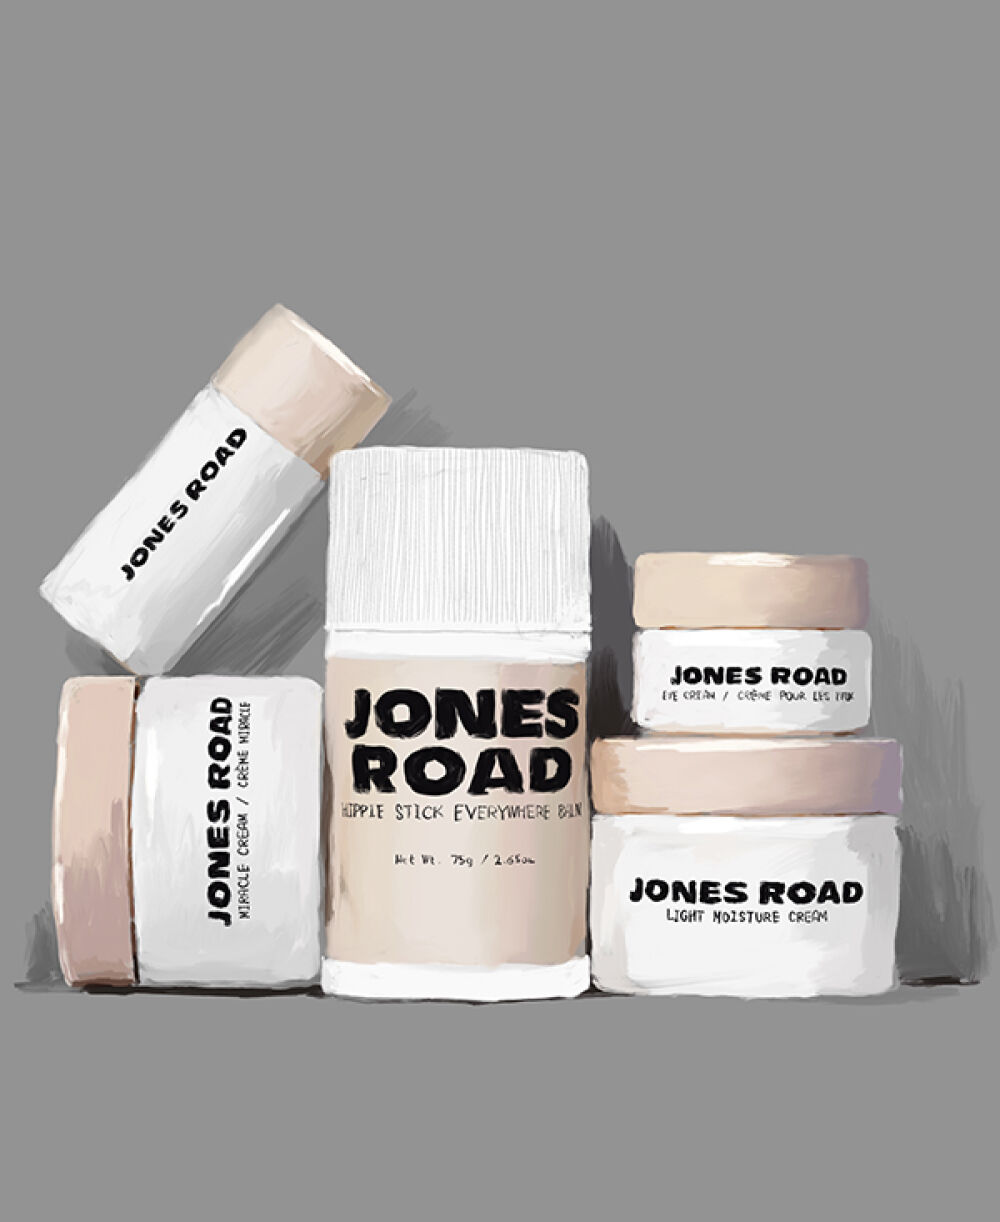 Branding illustration for Jones Road Beauty Advertising/Launching campaign by Christina Gliha